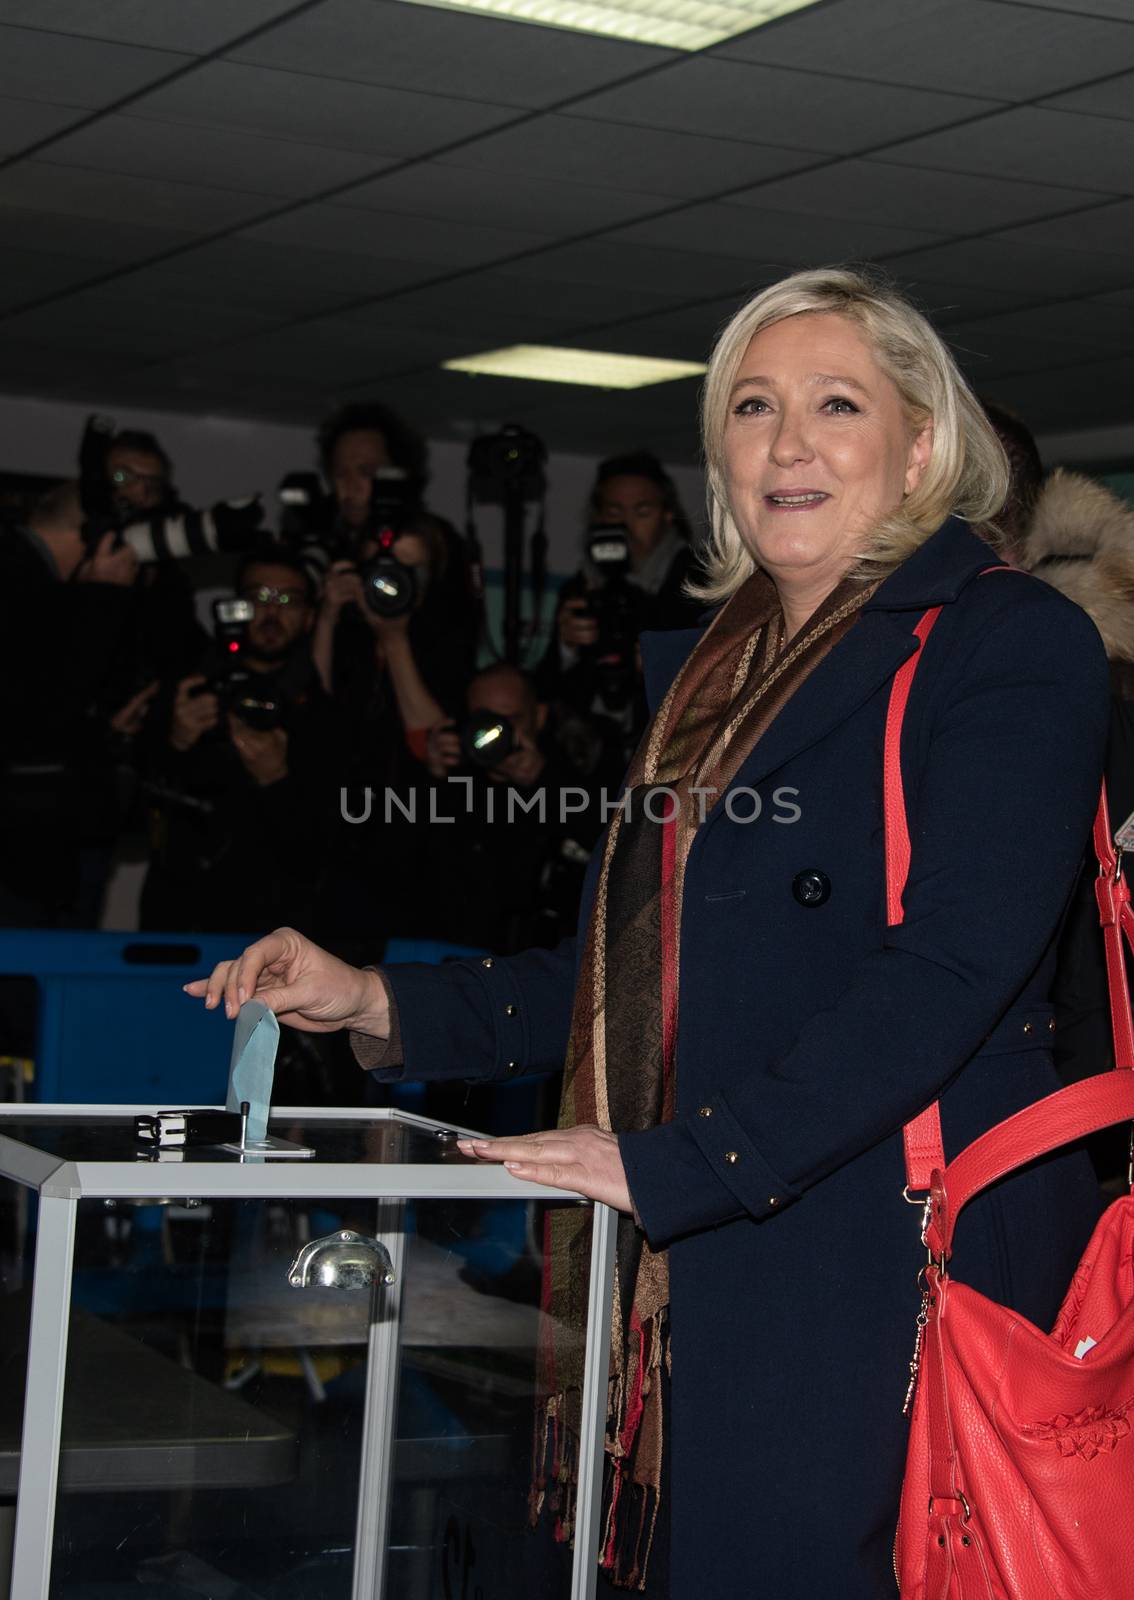 FRANCE, H�nin-beaumont : French far-right Front National (FN) party's president and FN top candidate for the regional election in the Nord-Pas-de-Calais-Picardie region, Marine Le Pen, casts her ballot on December 13, 2015 at a polling station in Henin-Beaumont, northern France, during the second round of the regional elections. 